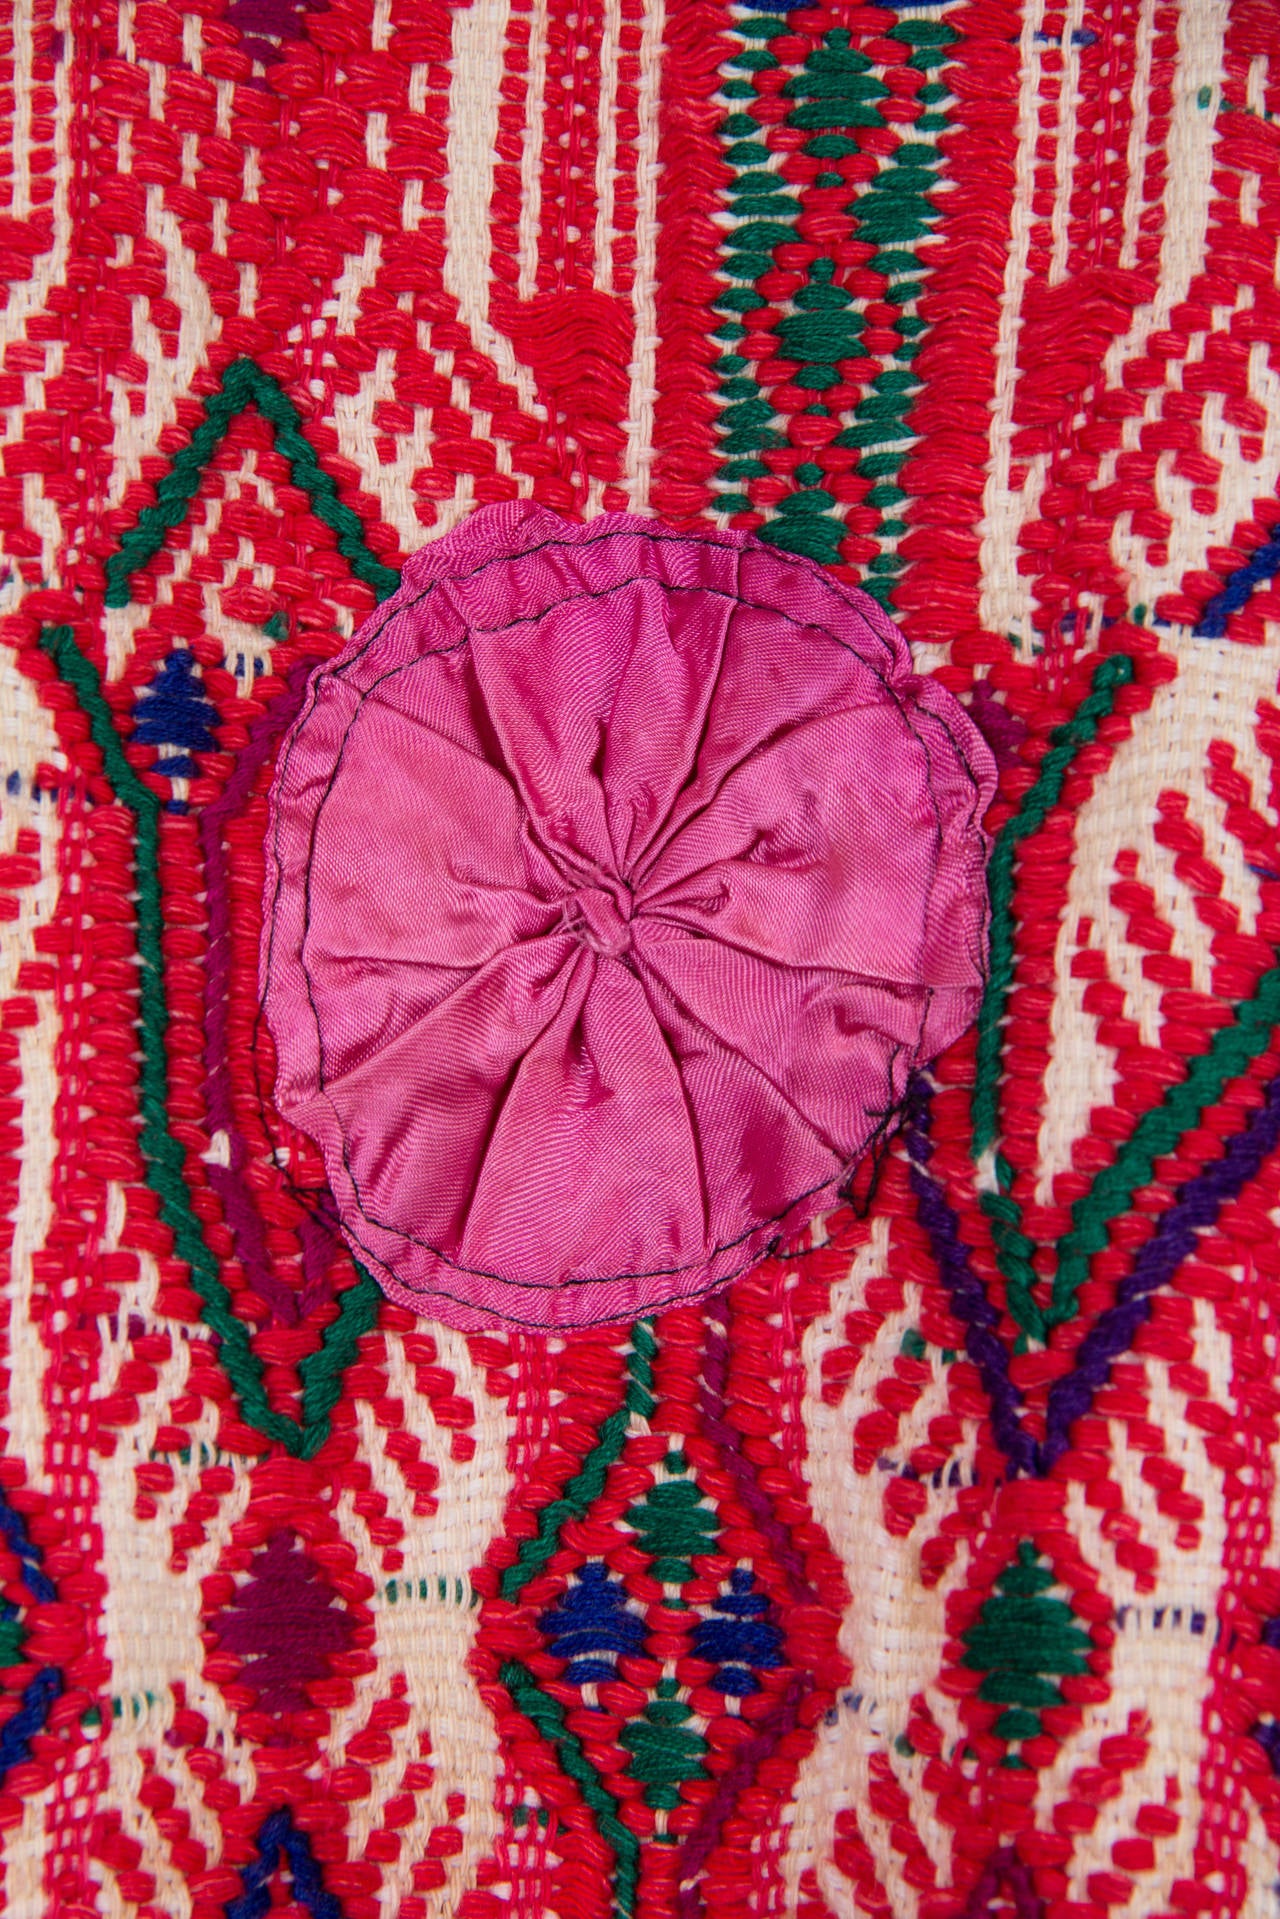 South American Ethnic Embroidery 1